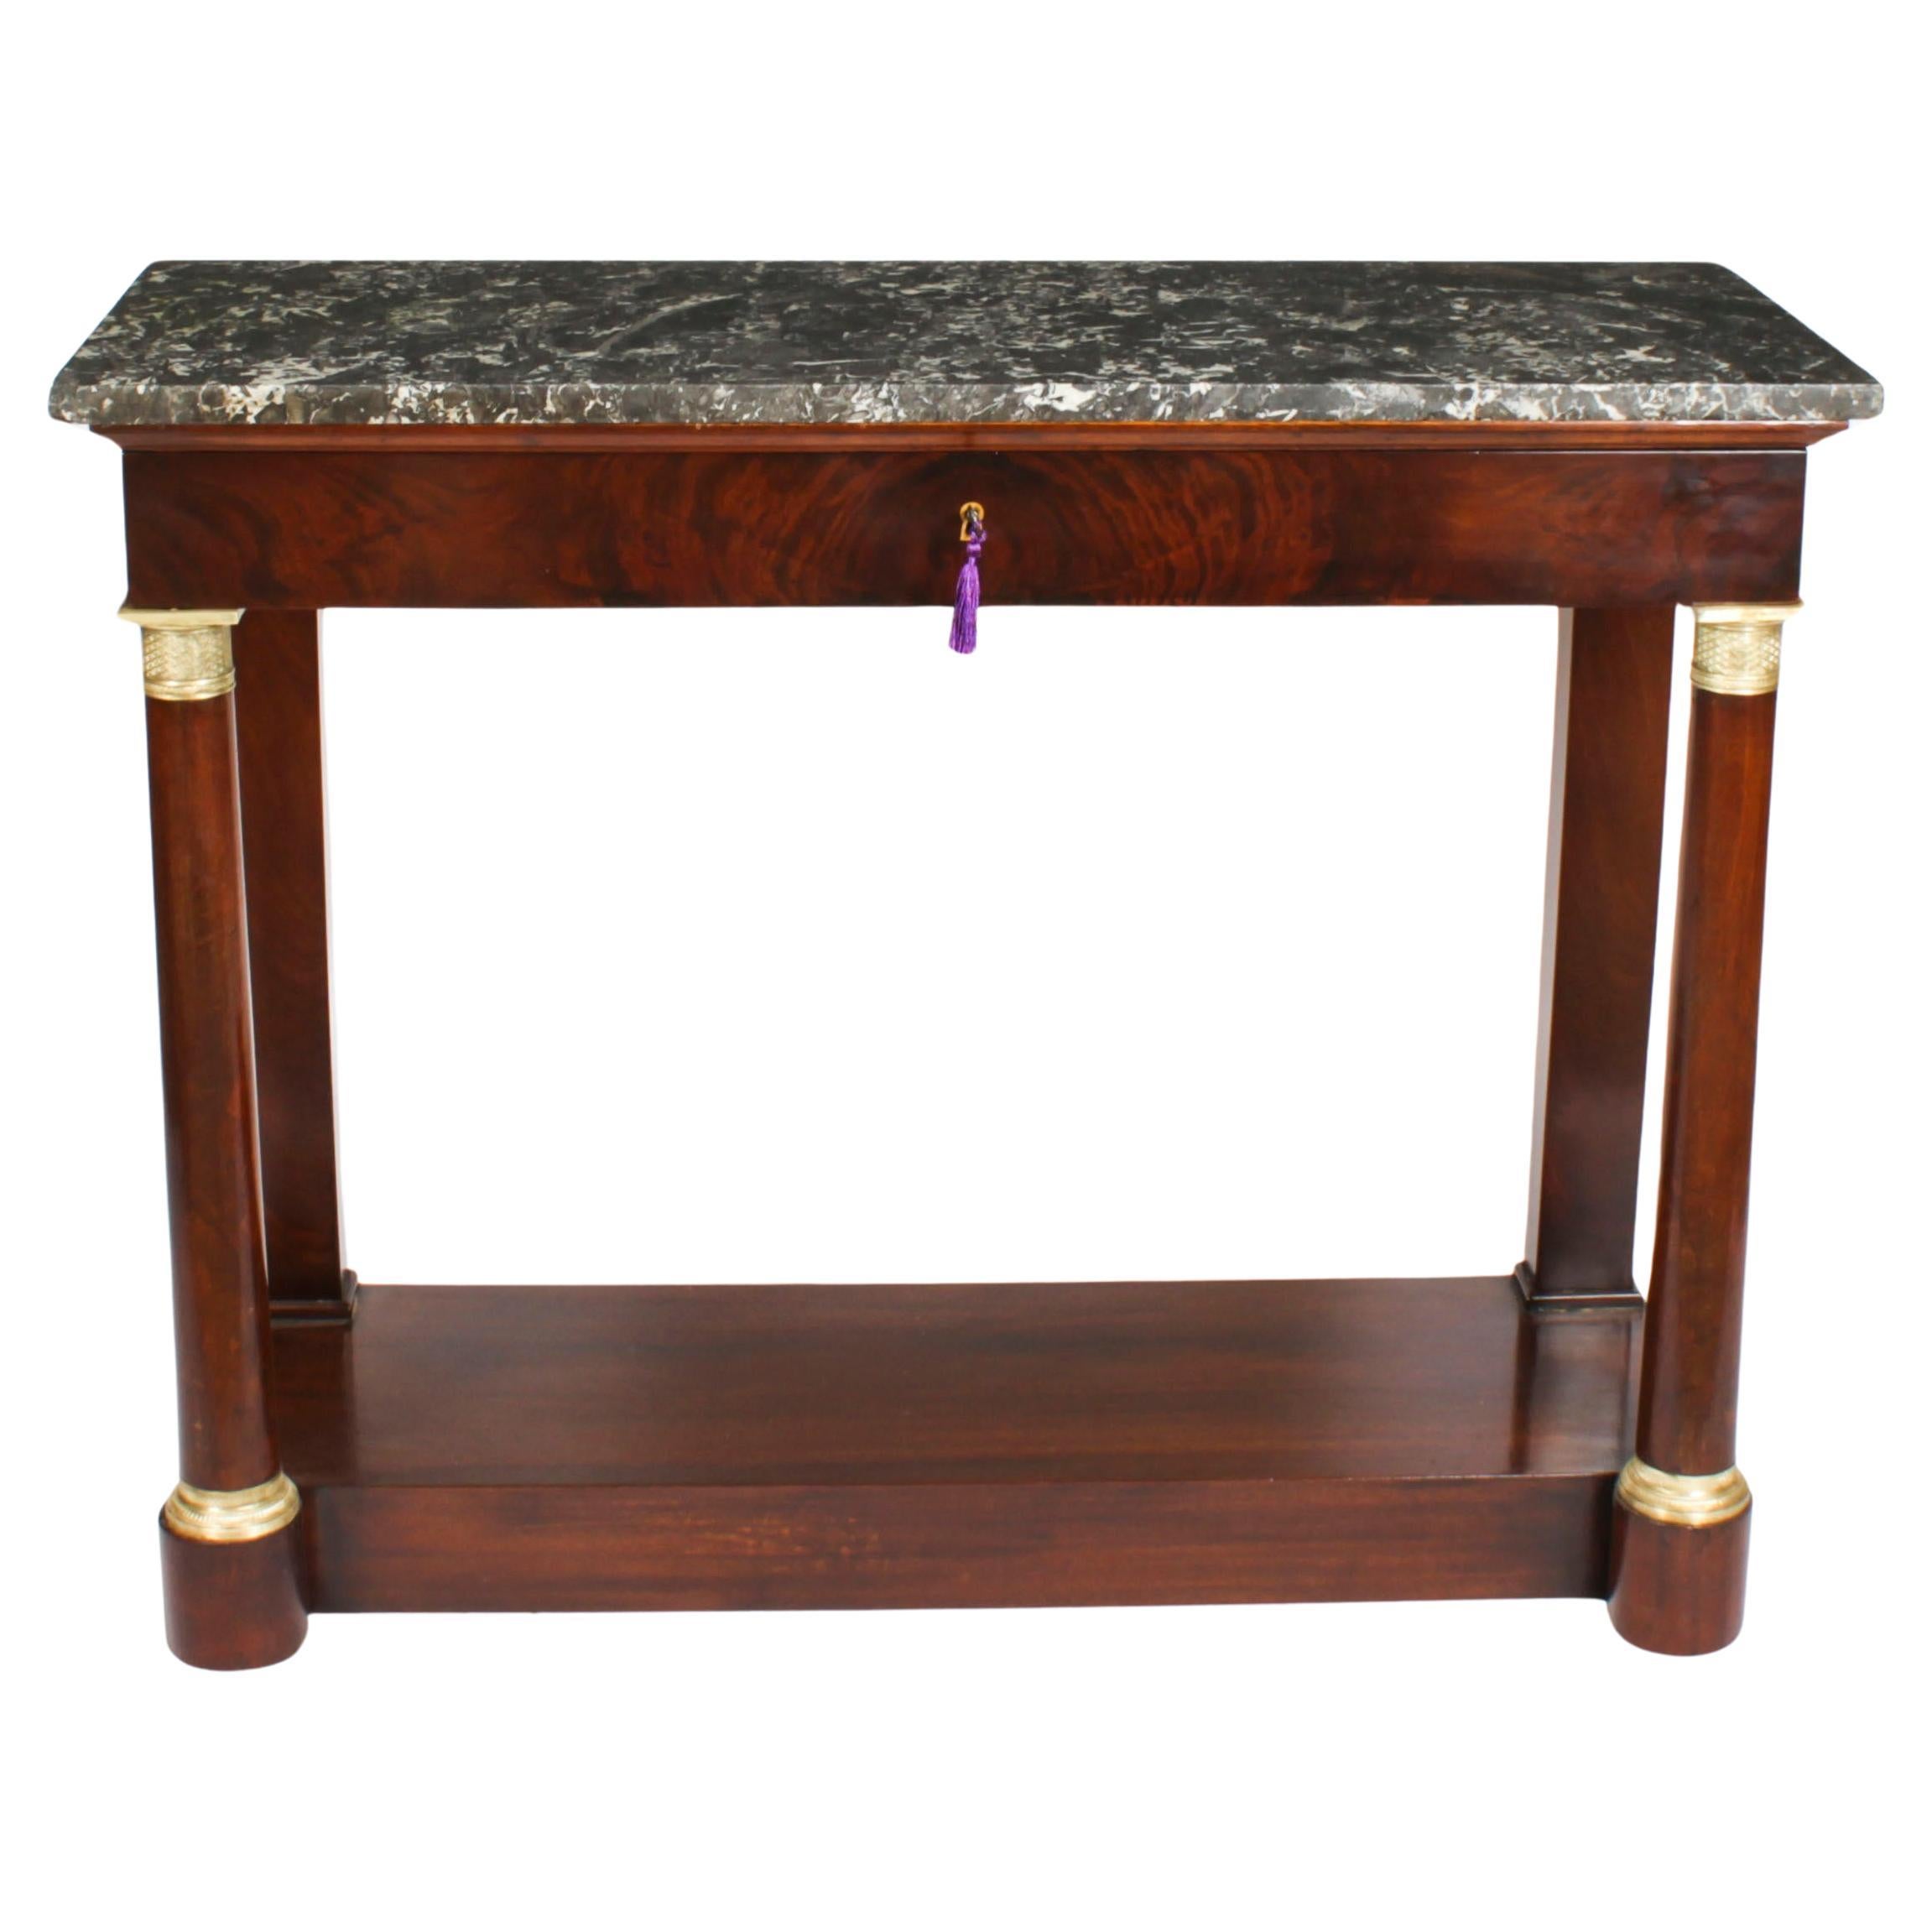 Antique French Empire Marble Top Ormolu Mounted Console Table 19th Century